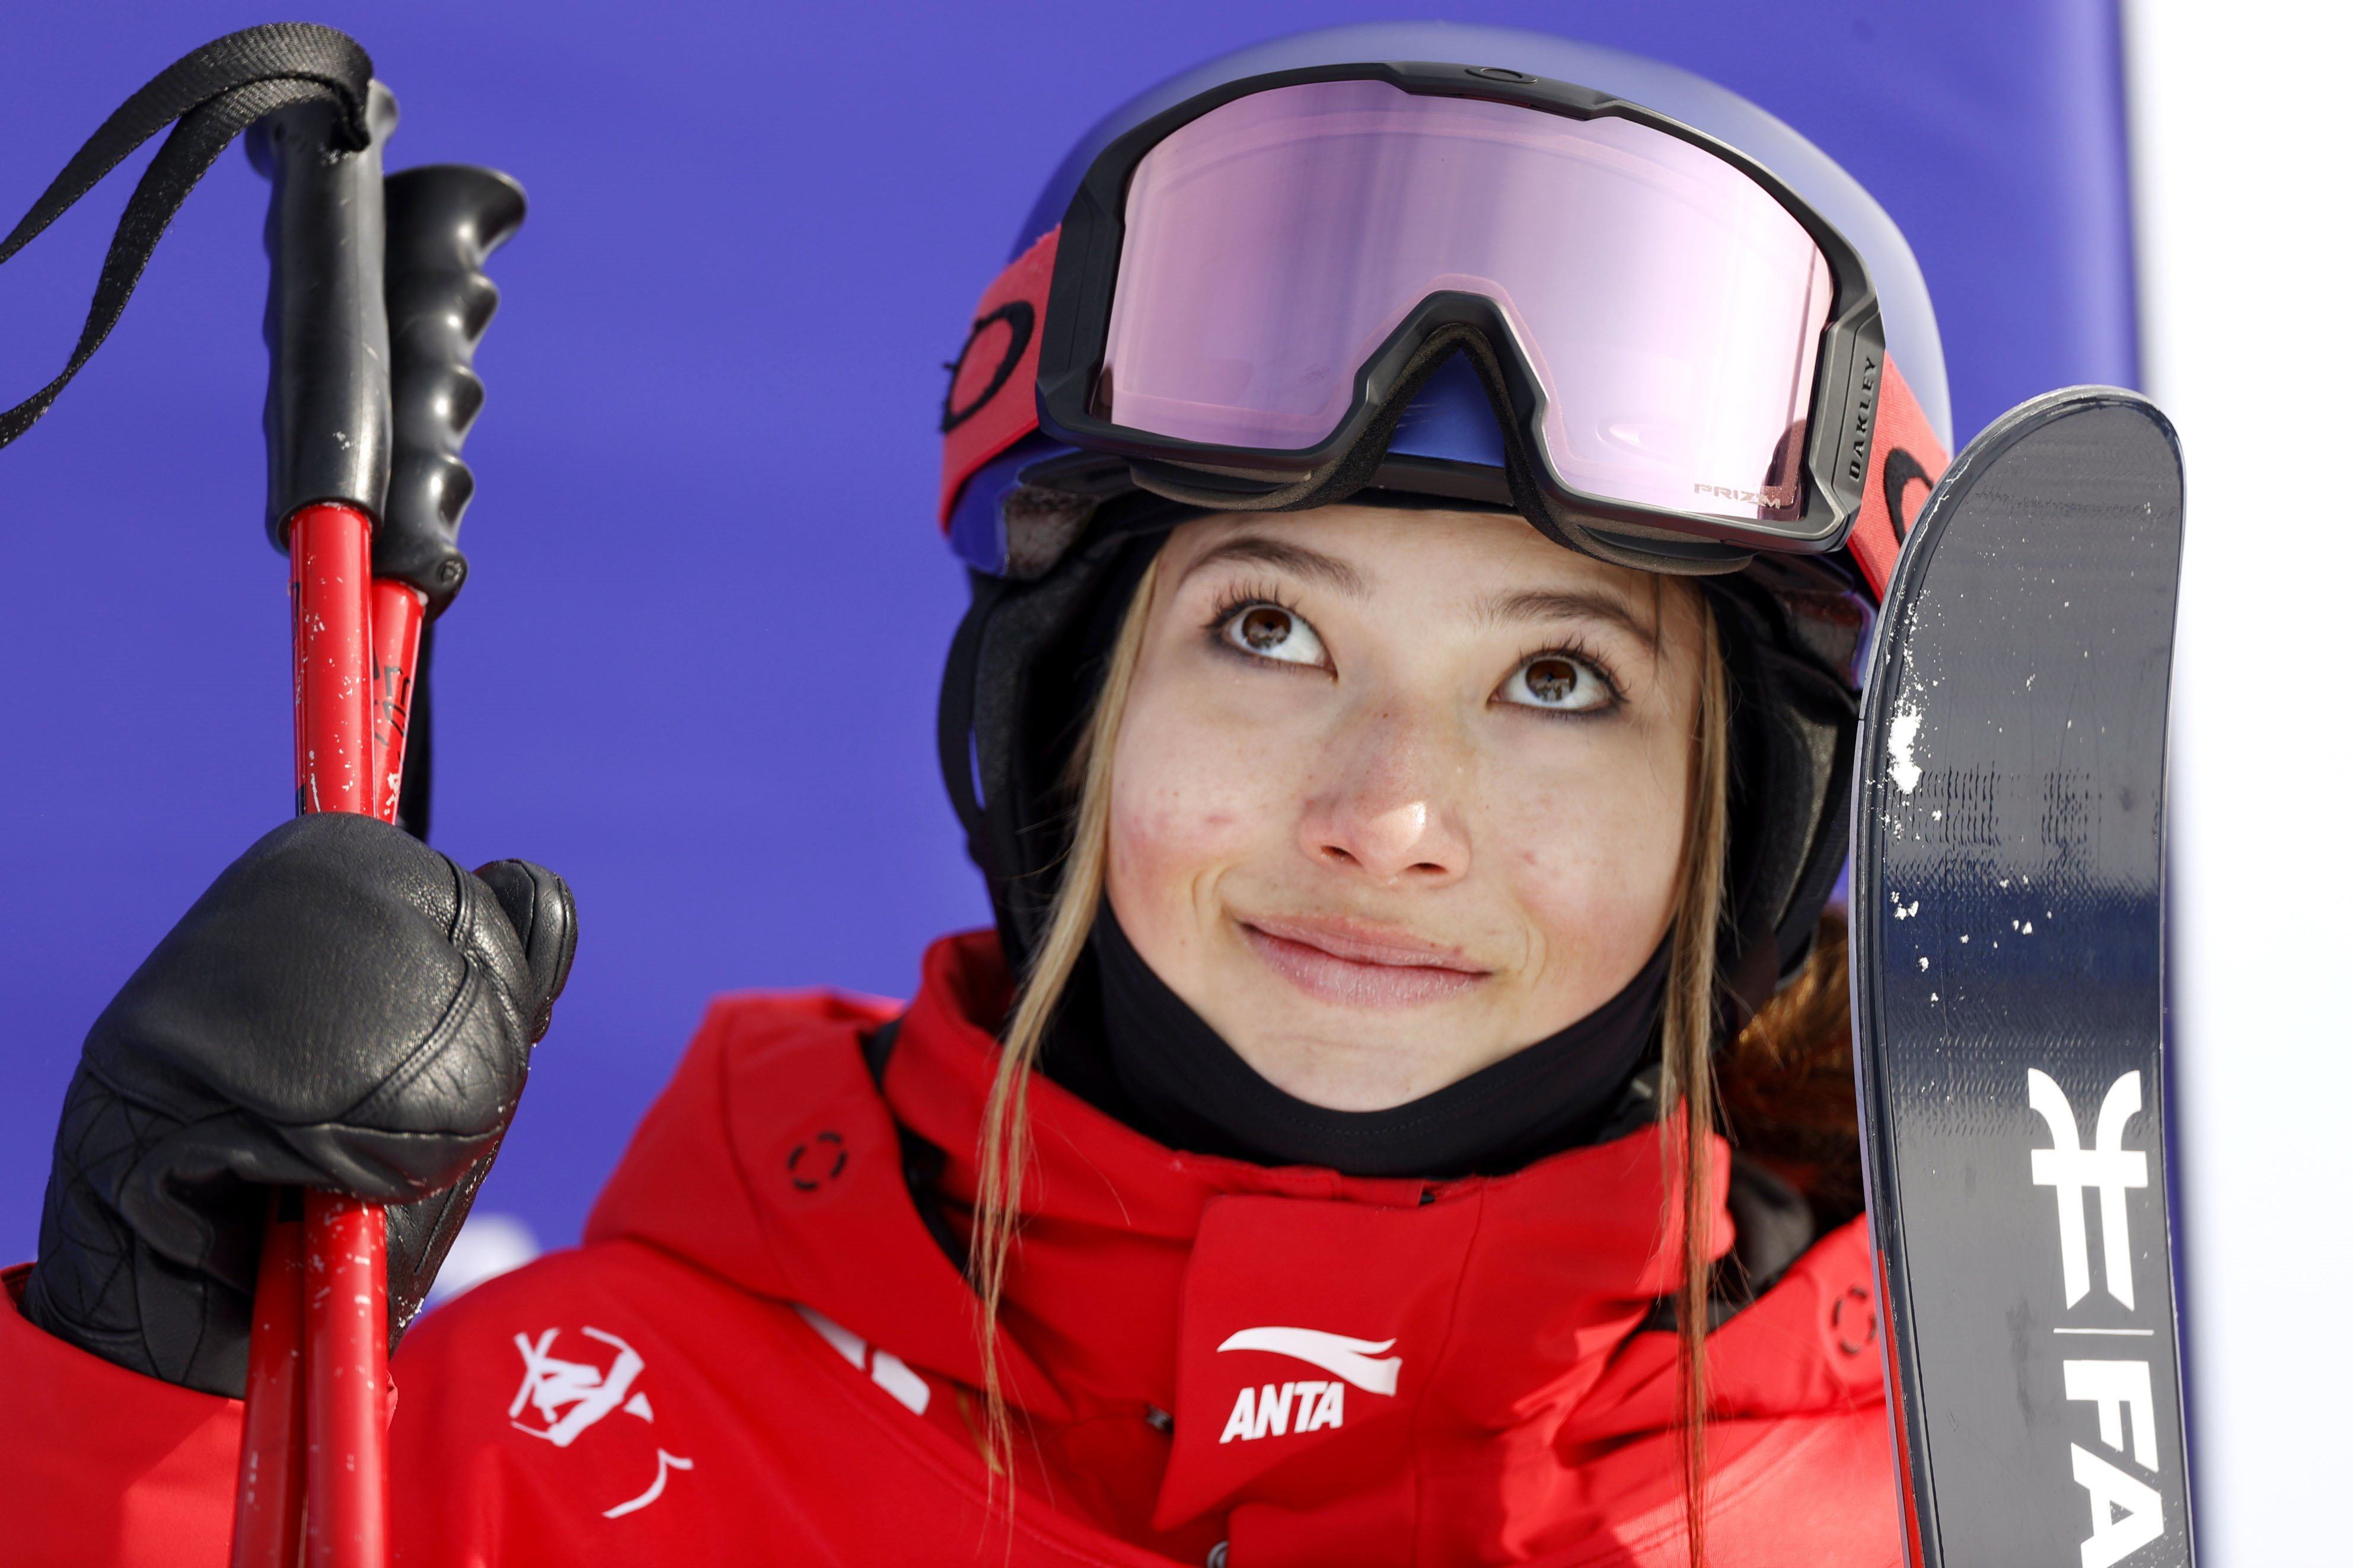 Freestyle skier Eileen Gu pictured after her second run of the women’s freeski halfpipe at the Beijing Winter Olympics. Photo: Kyodo